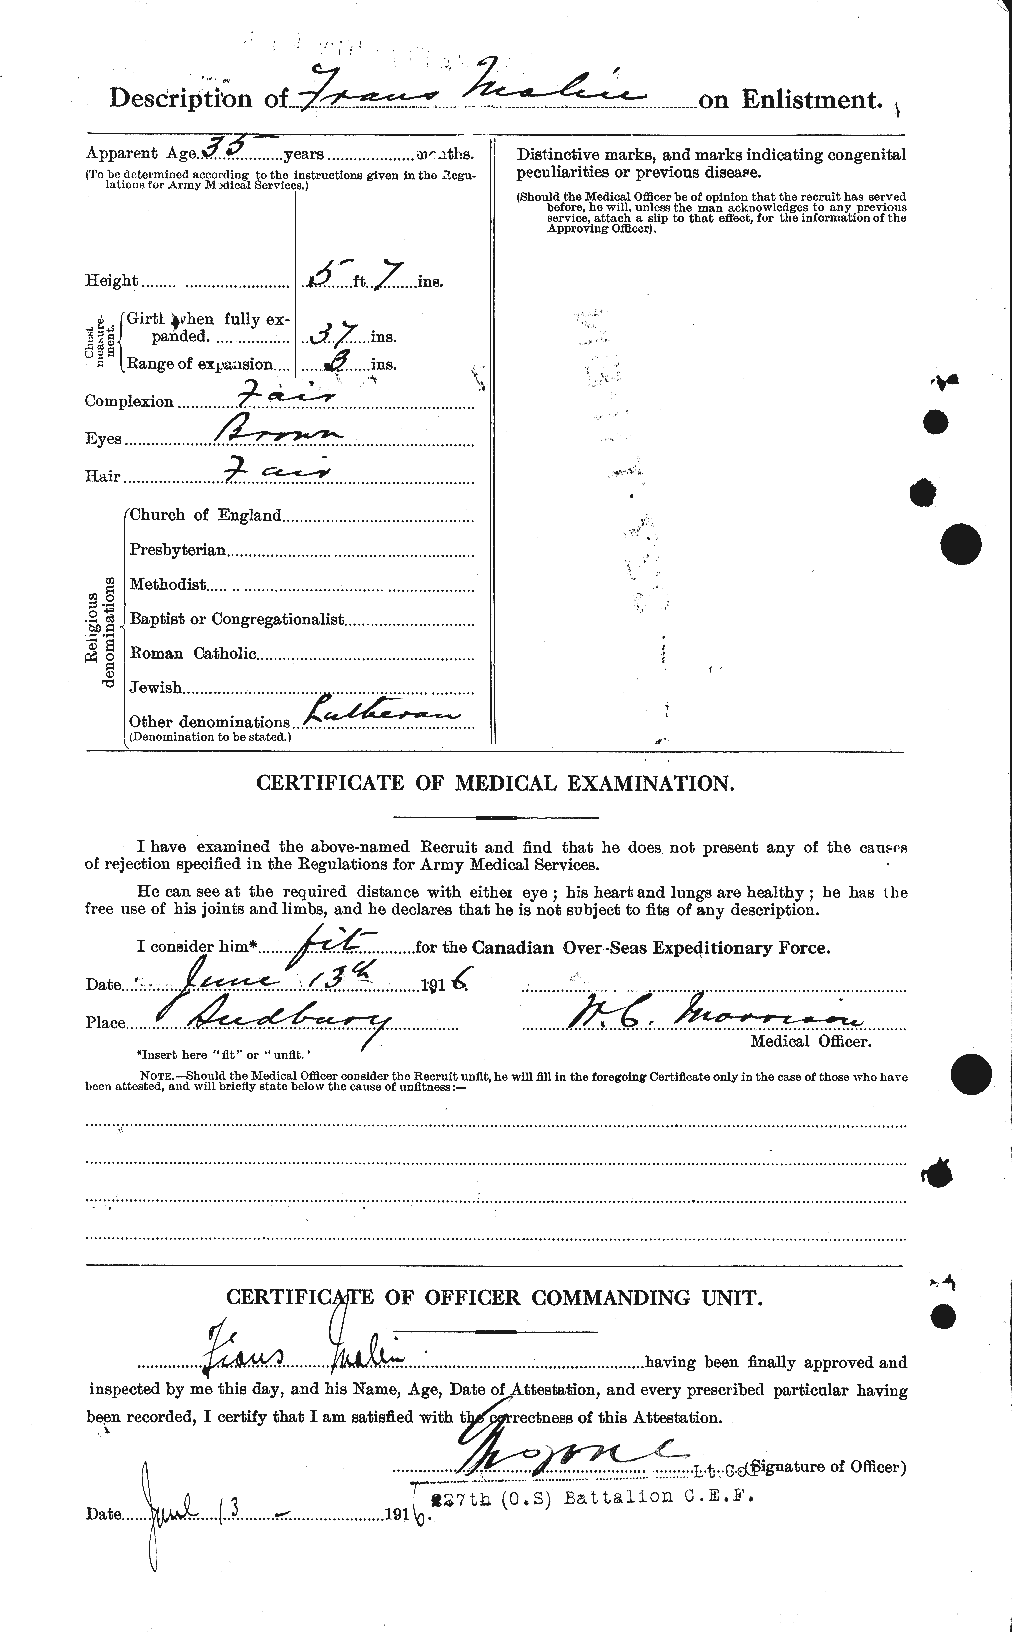 Personnel Records of the First World War - CEF 477410b